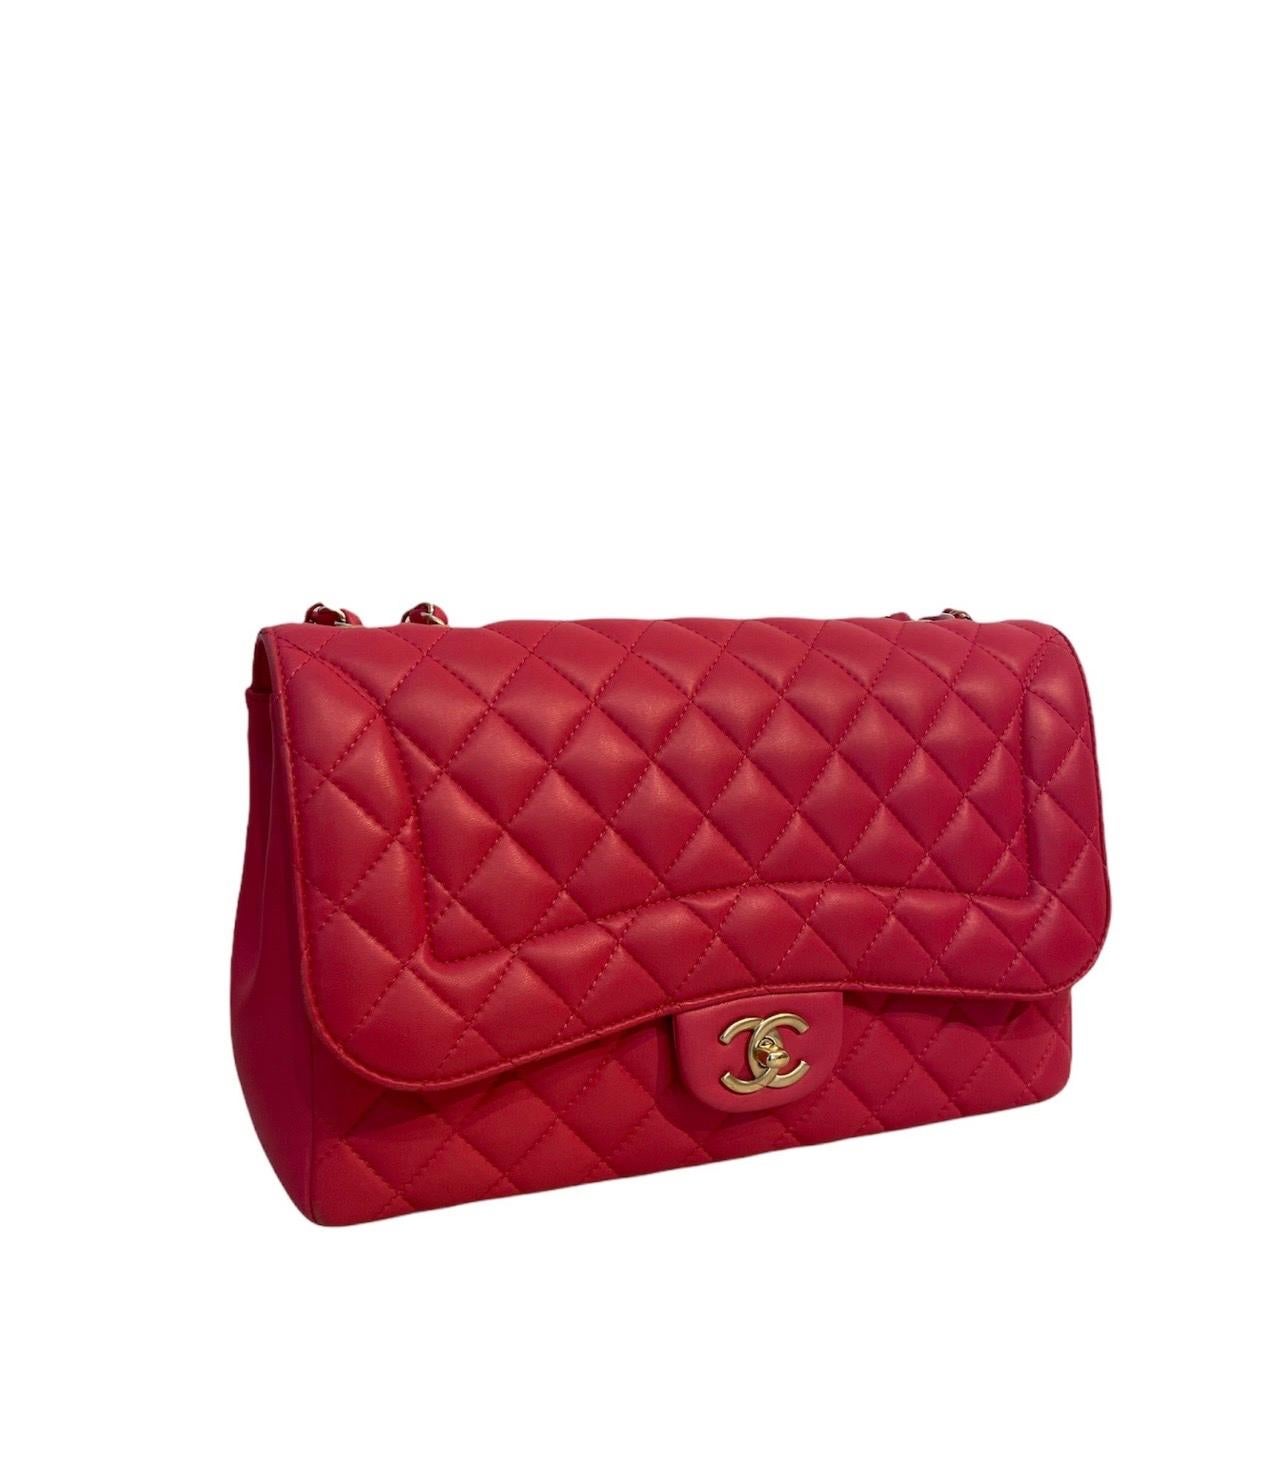 Chanel’s iconic Jumbo edition bag in fuchsia quilted leather with silver hardware.  Features a front flap with CC turn lock. The interior is lined with a fuchsia fabric and has an internal pocket.  The bag is equipped with a silver chain and fuchsia